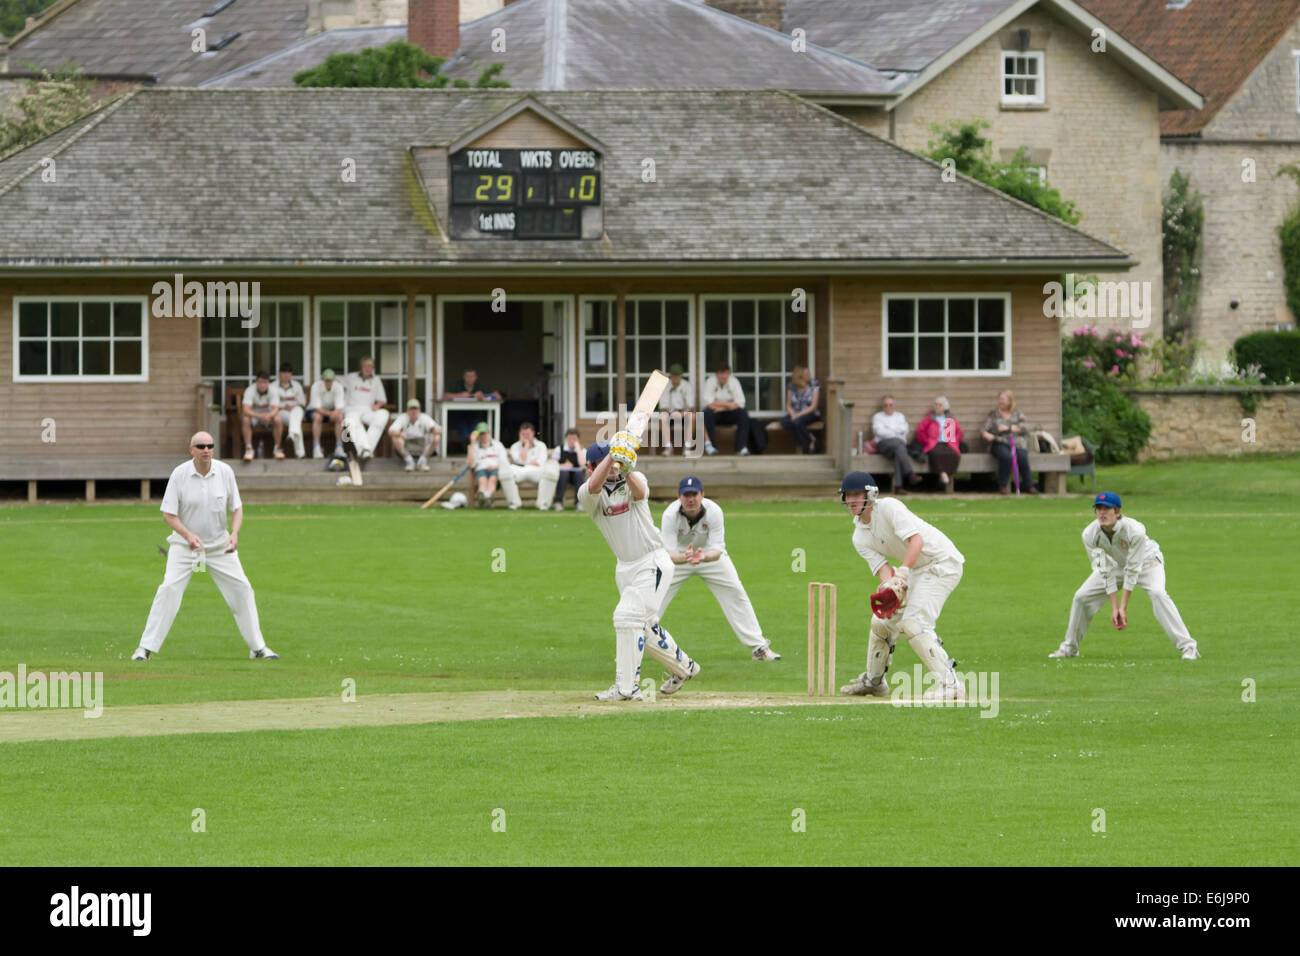 Village cricket at Hovingham in north Yorkshire England Stock Photo